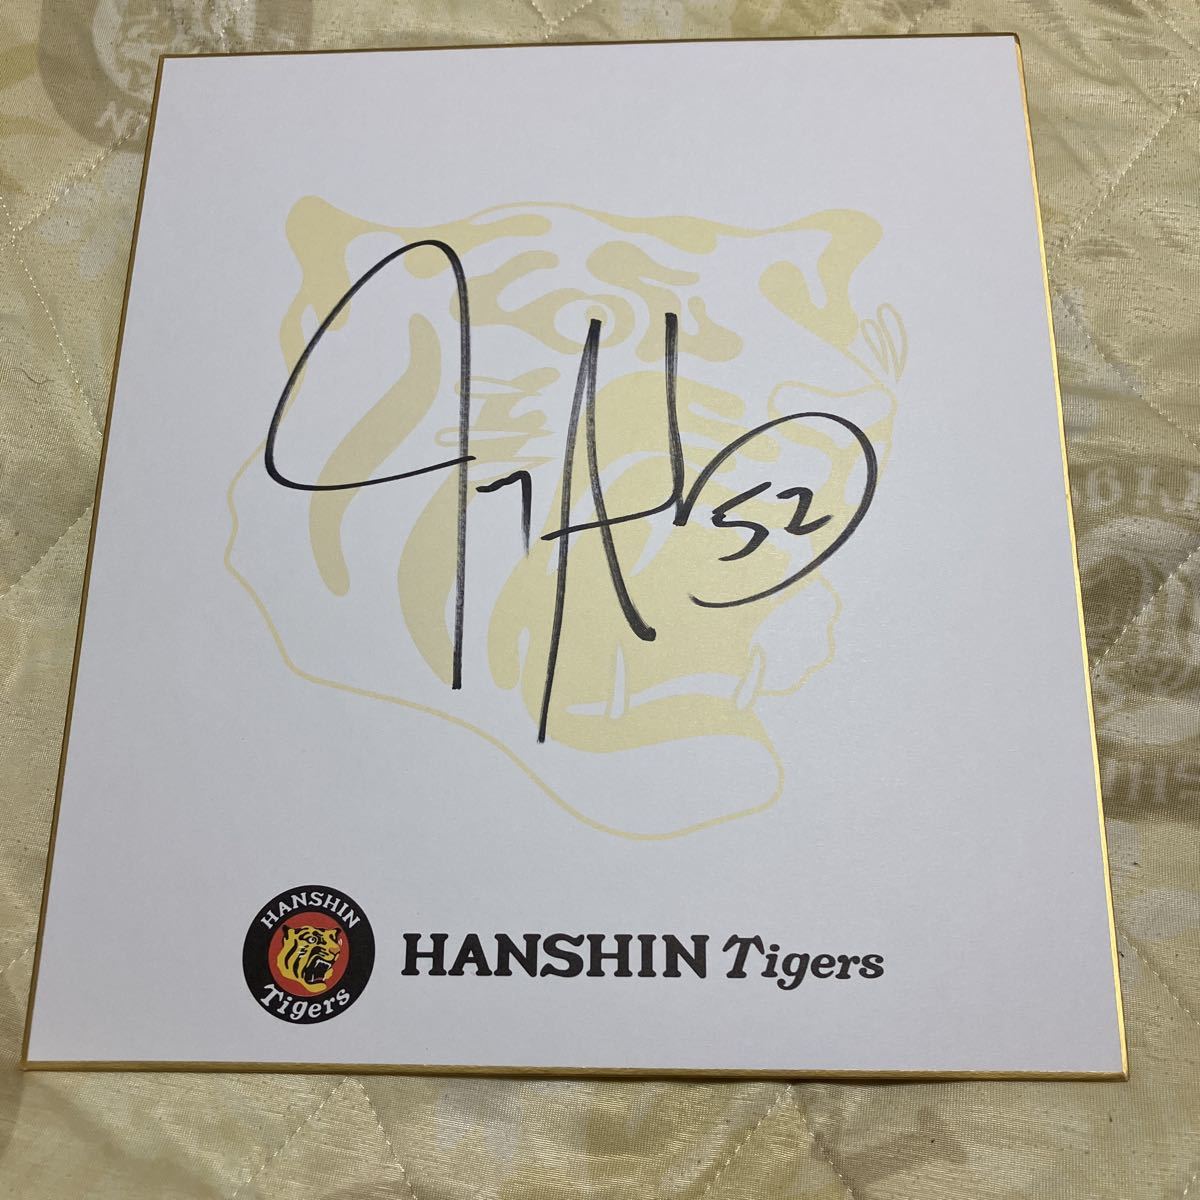 Hanshin Tigers Sands autographed colored paper Official team not for sale colored paper, baseball, Souvenir, Related Merchandise, sign